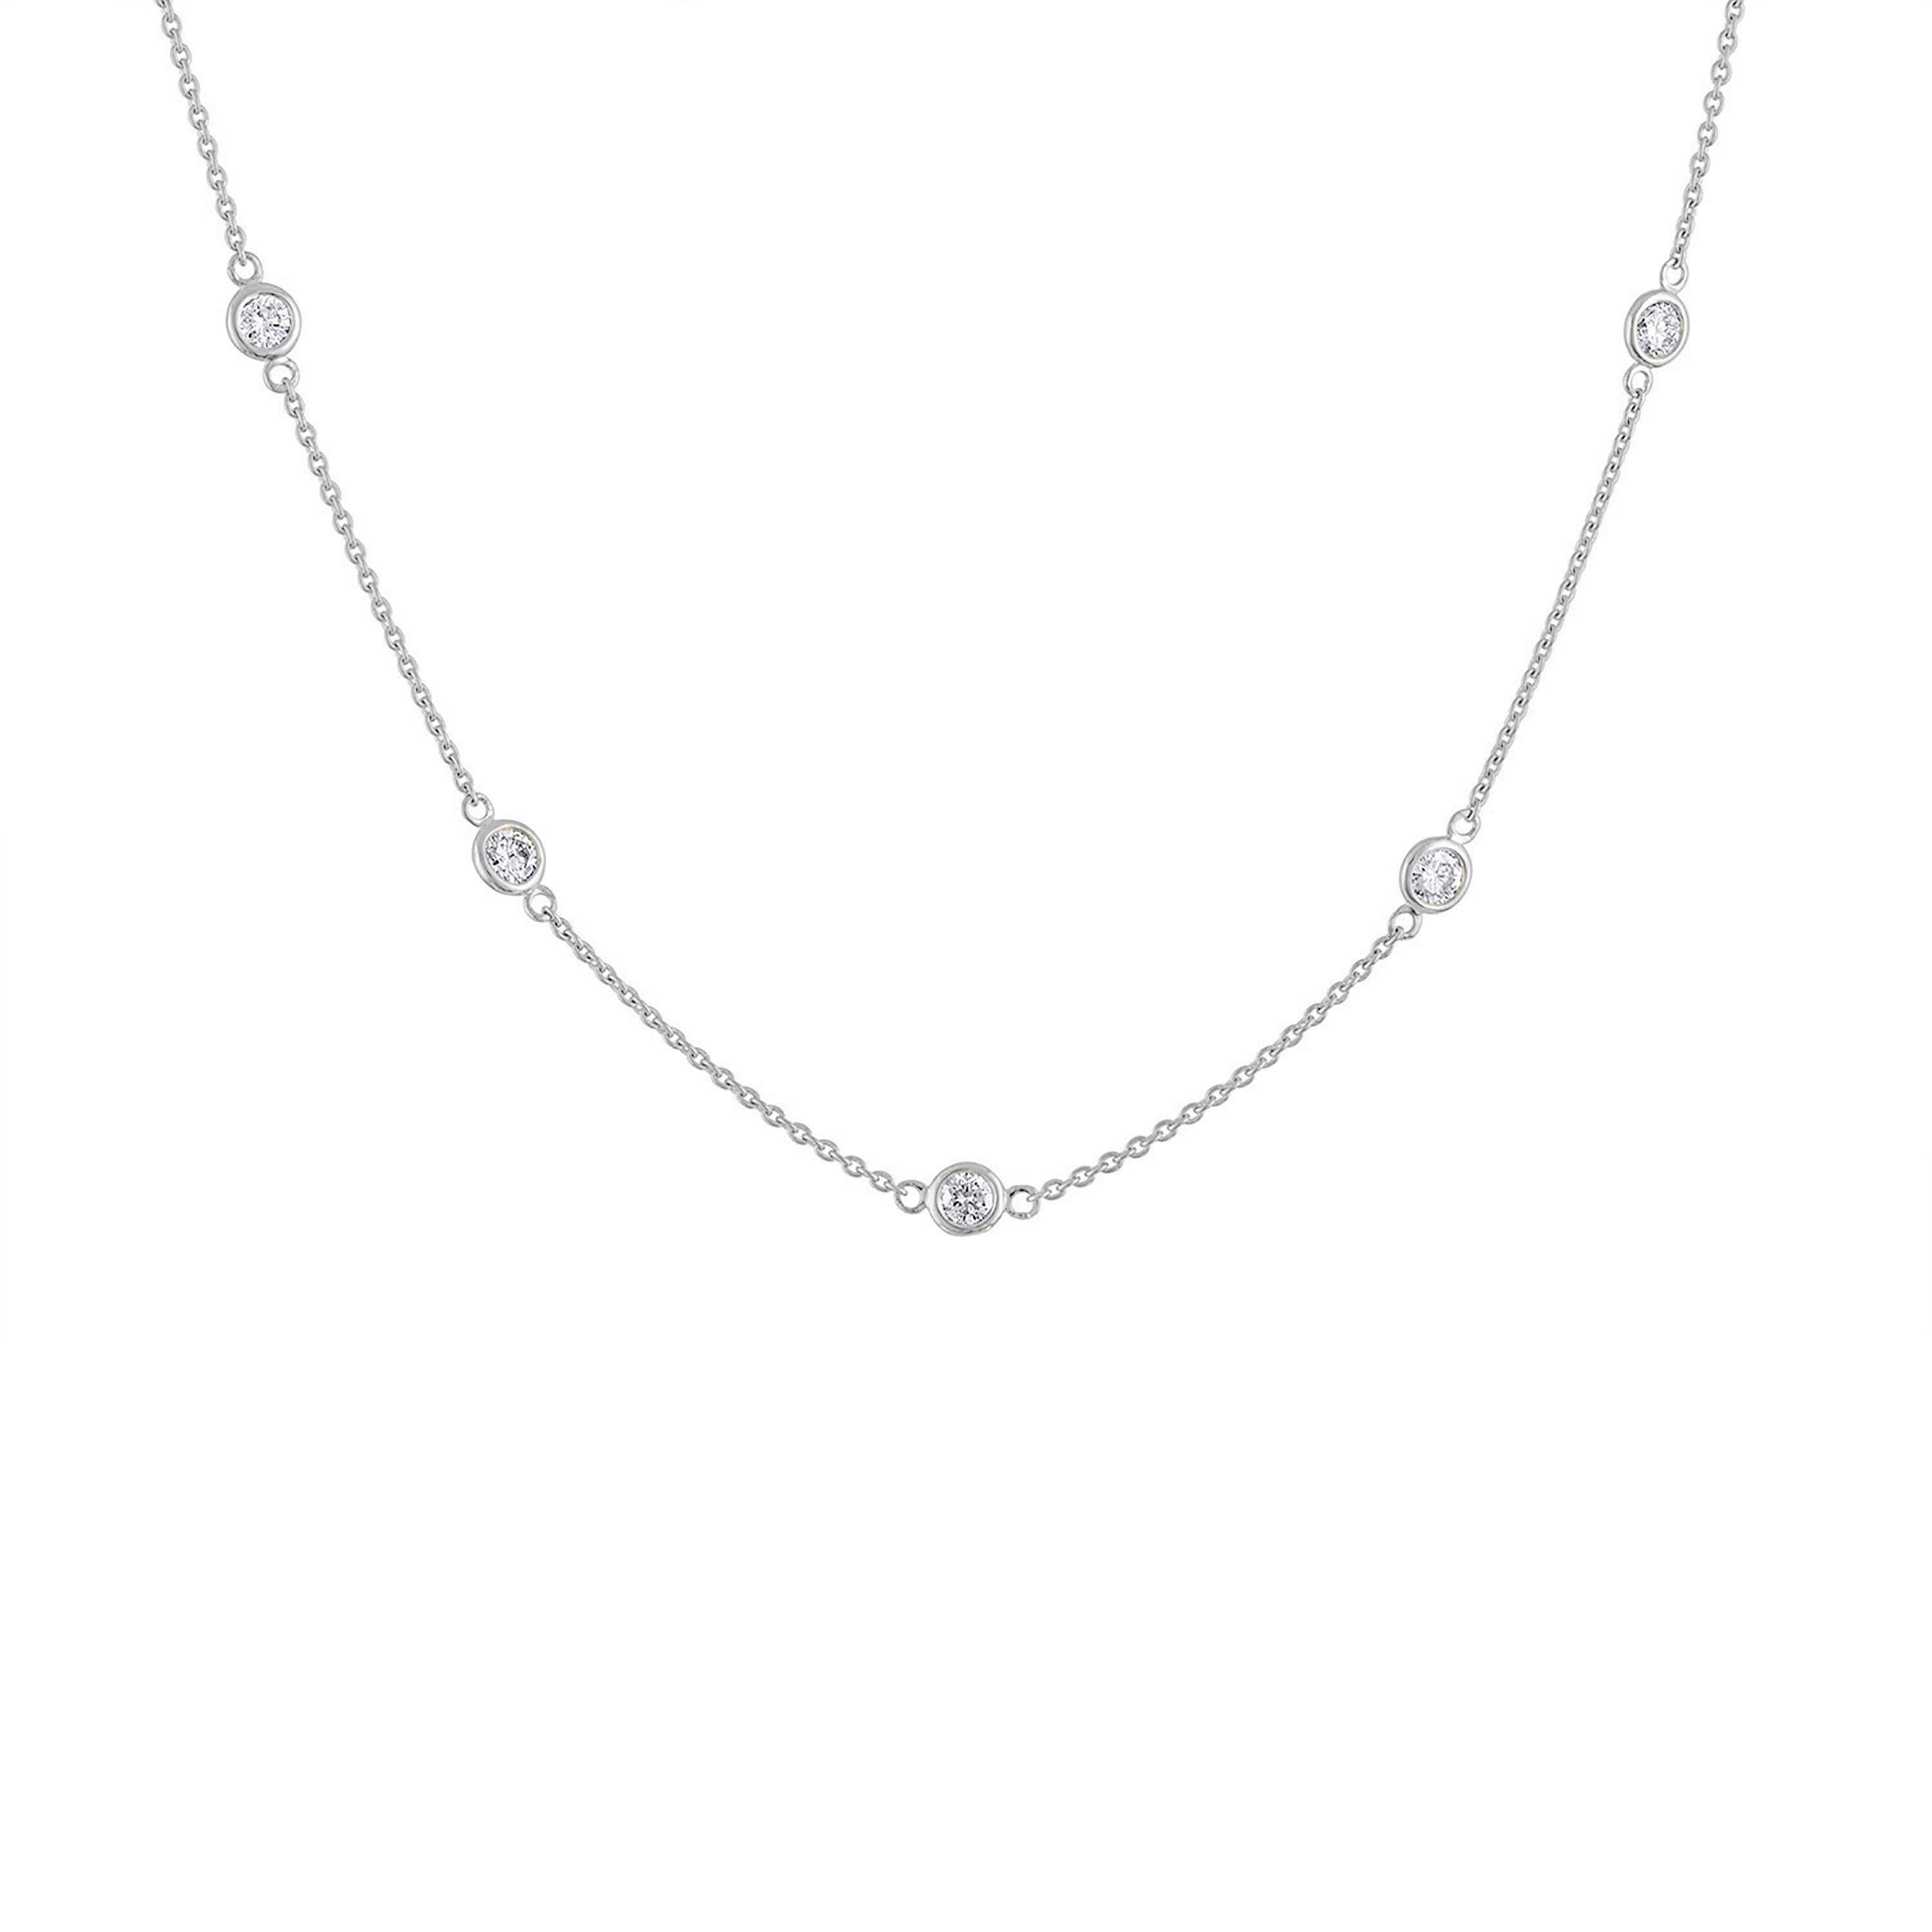 An accessory for any occasion, this petite necklace features sparkling bezel set, round-cut natural diamonds evenly spaced along a rolo chain. Embedded in 14k white gold, this 1ct station necklace will elevate any attire. 'Video Available Upon